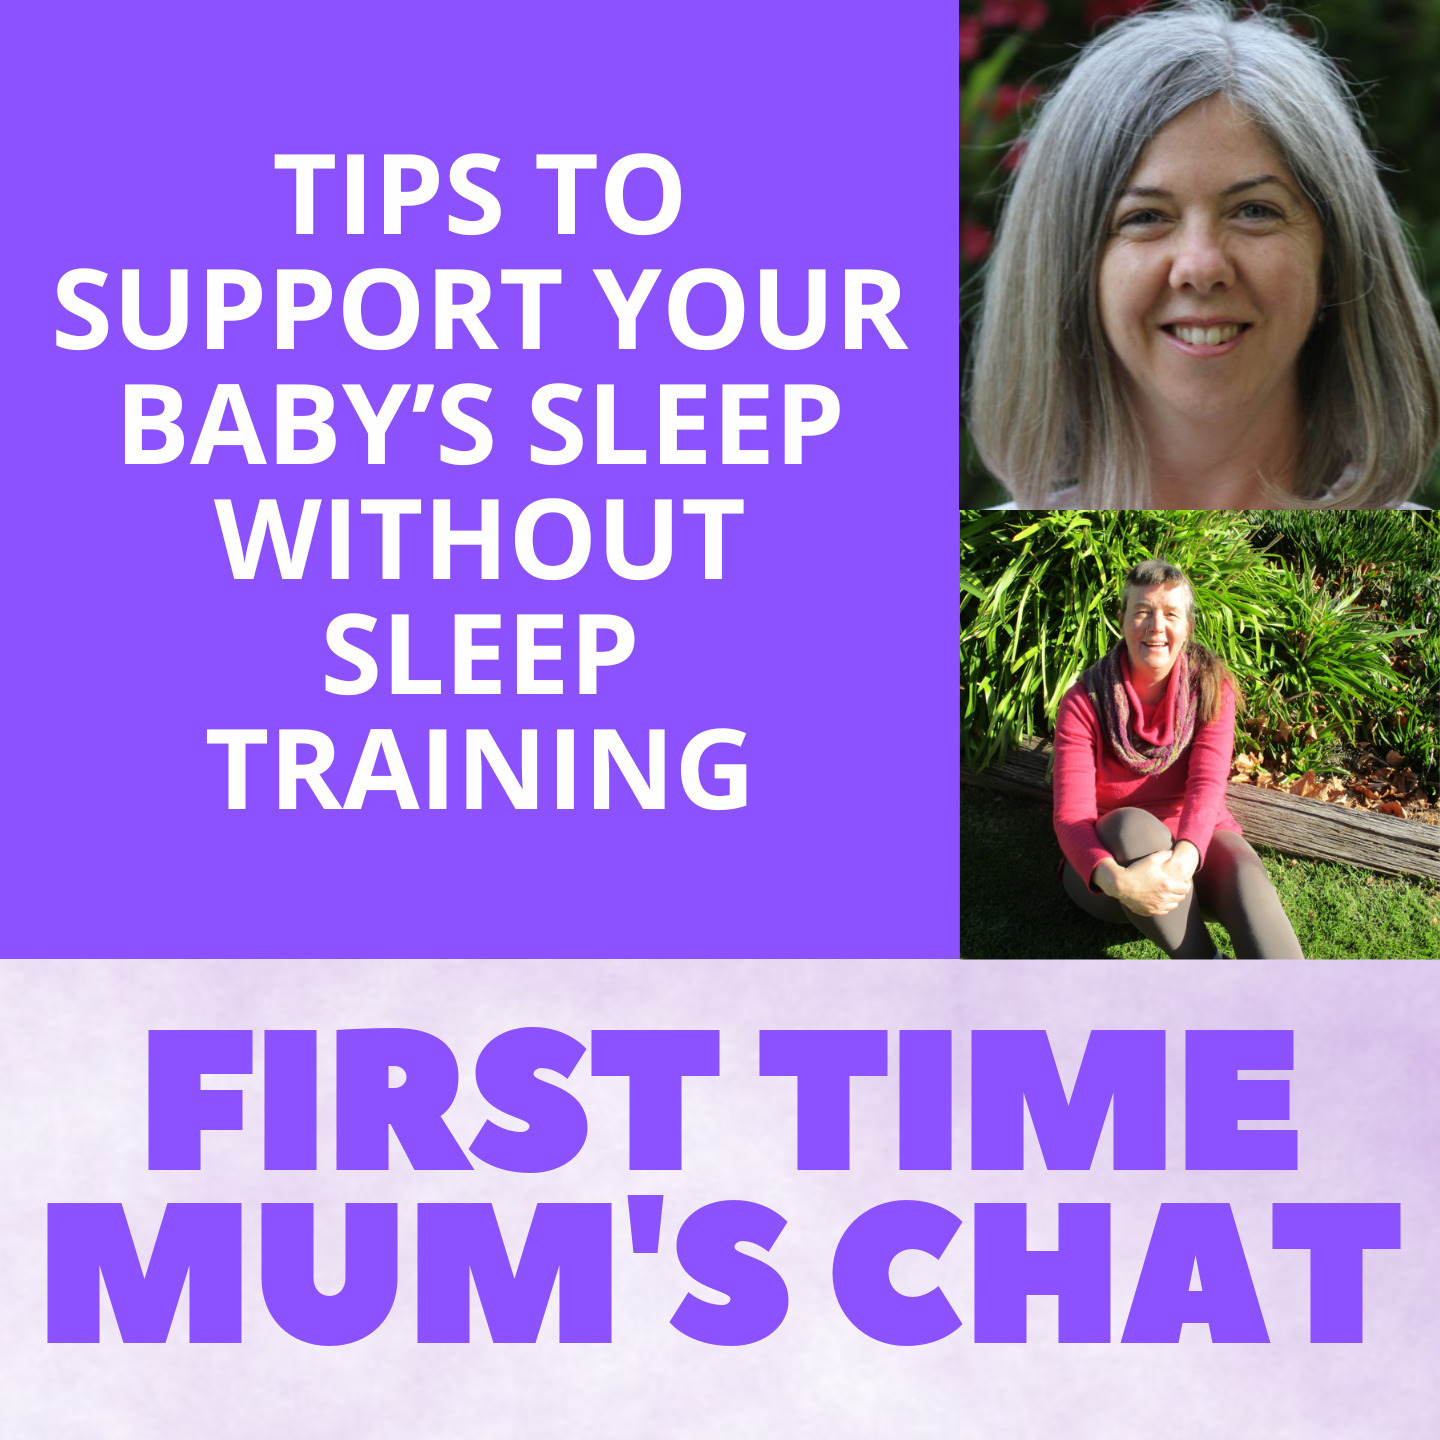 Tips to Support Your Baby's Sleep Without Sleep Training